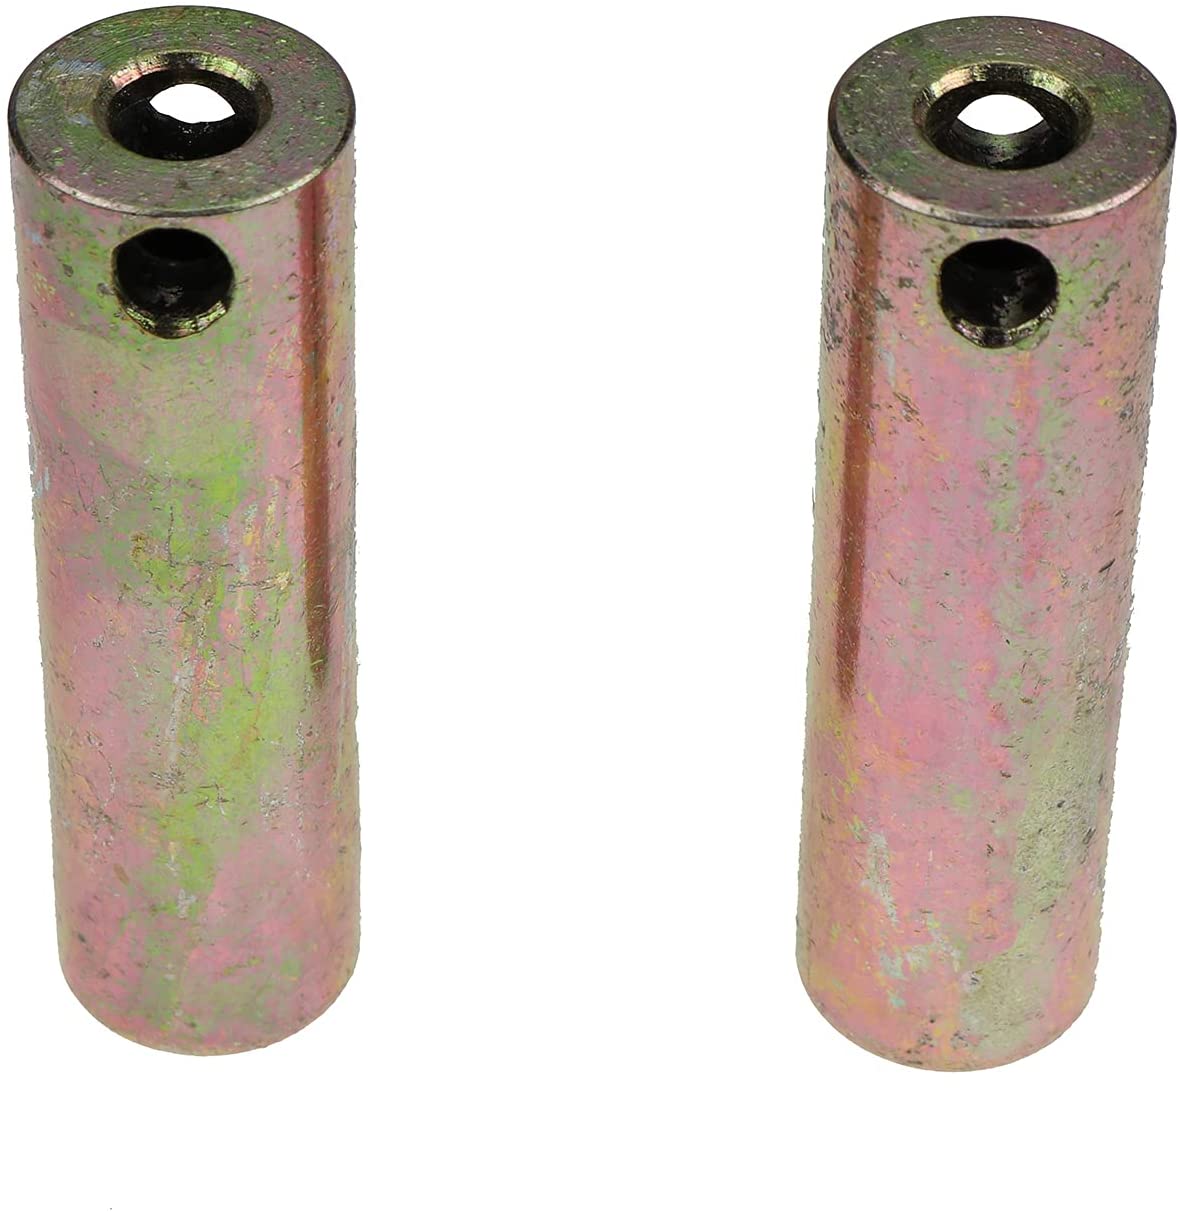 2X Lift Cylinder Arm Pivot Pin 6718789 for Bobcat 553 751 753 763 773 863 864 873 883 A220 S130 S150 S160 S175 S185 S205 S450 T190 T200 T450 Skid Steer Loaders(2-Pack) - KUDUPARTS